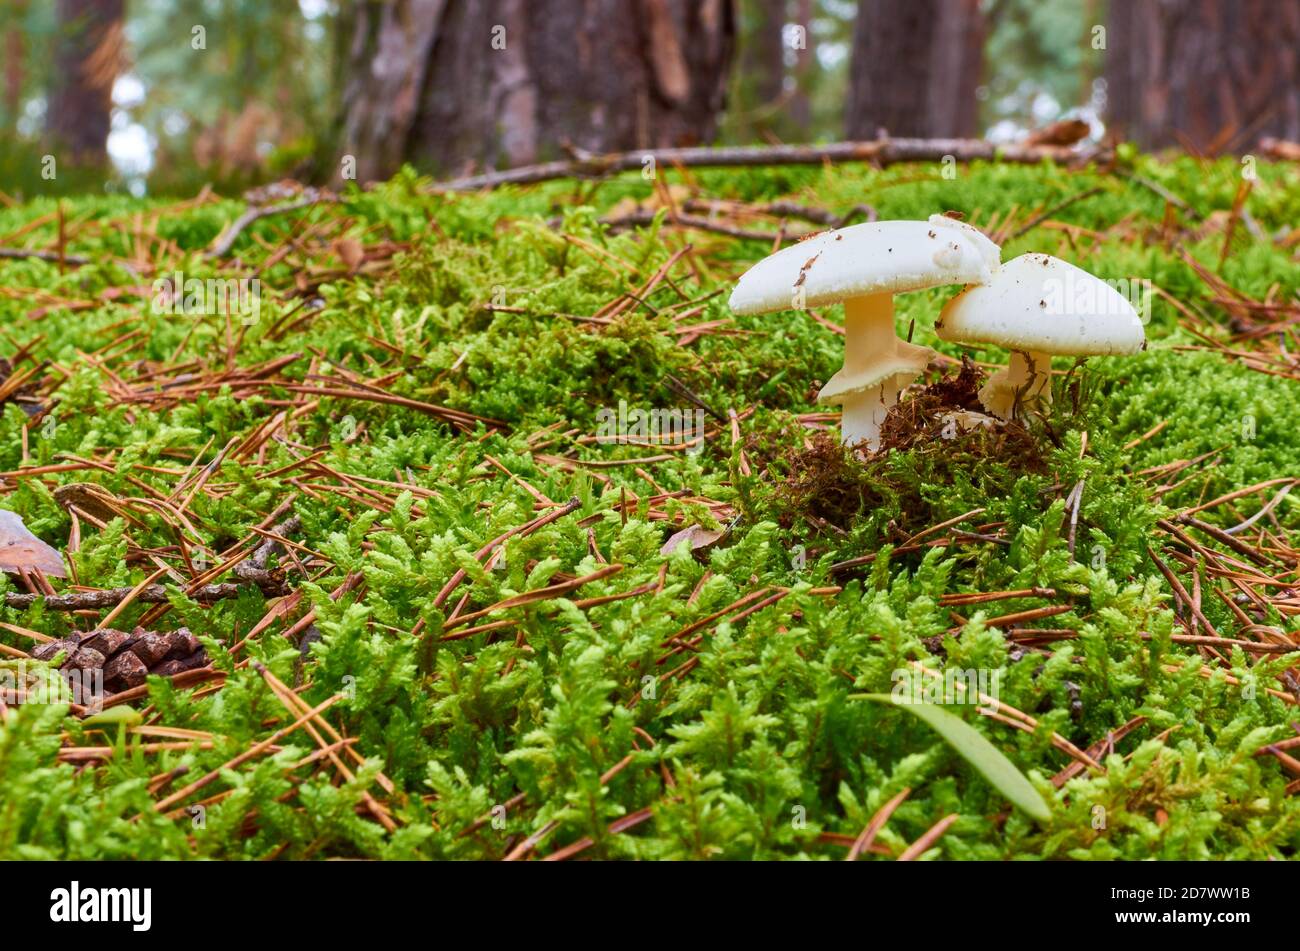 Two white mushrooms with hats grow between the moss on the ground Stock Photo